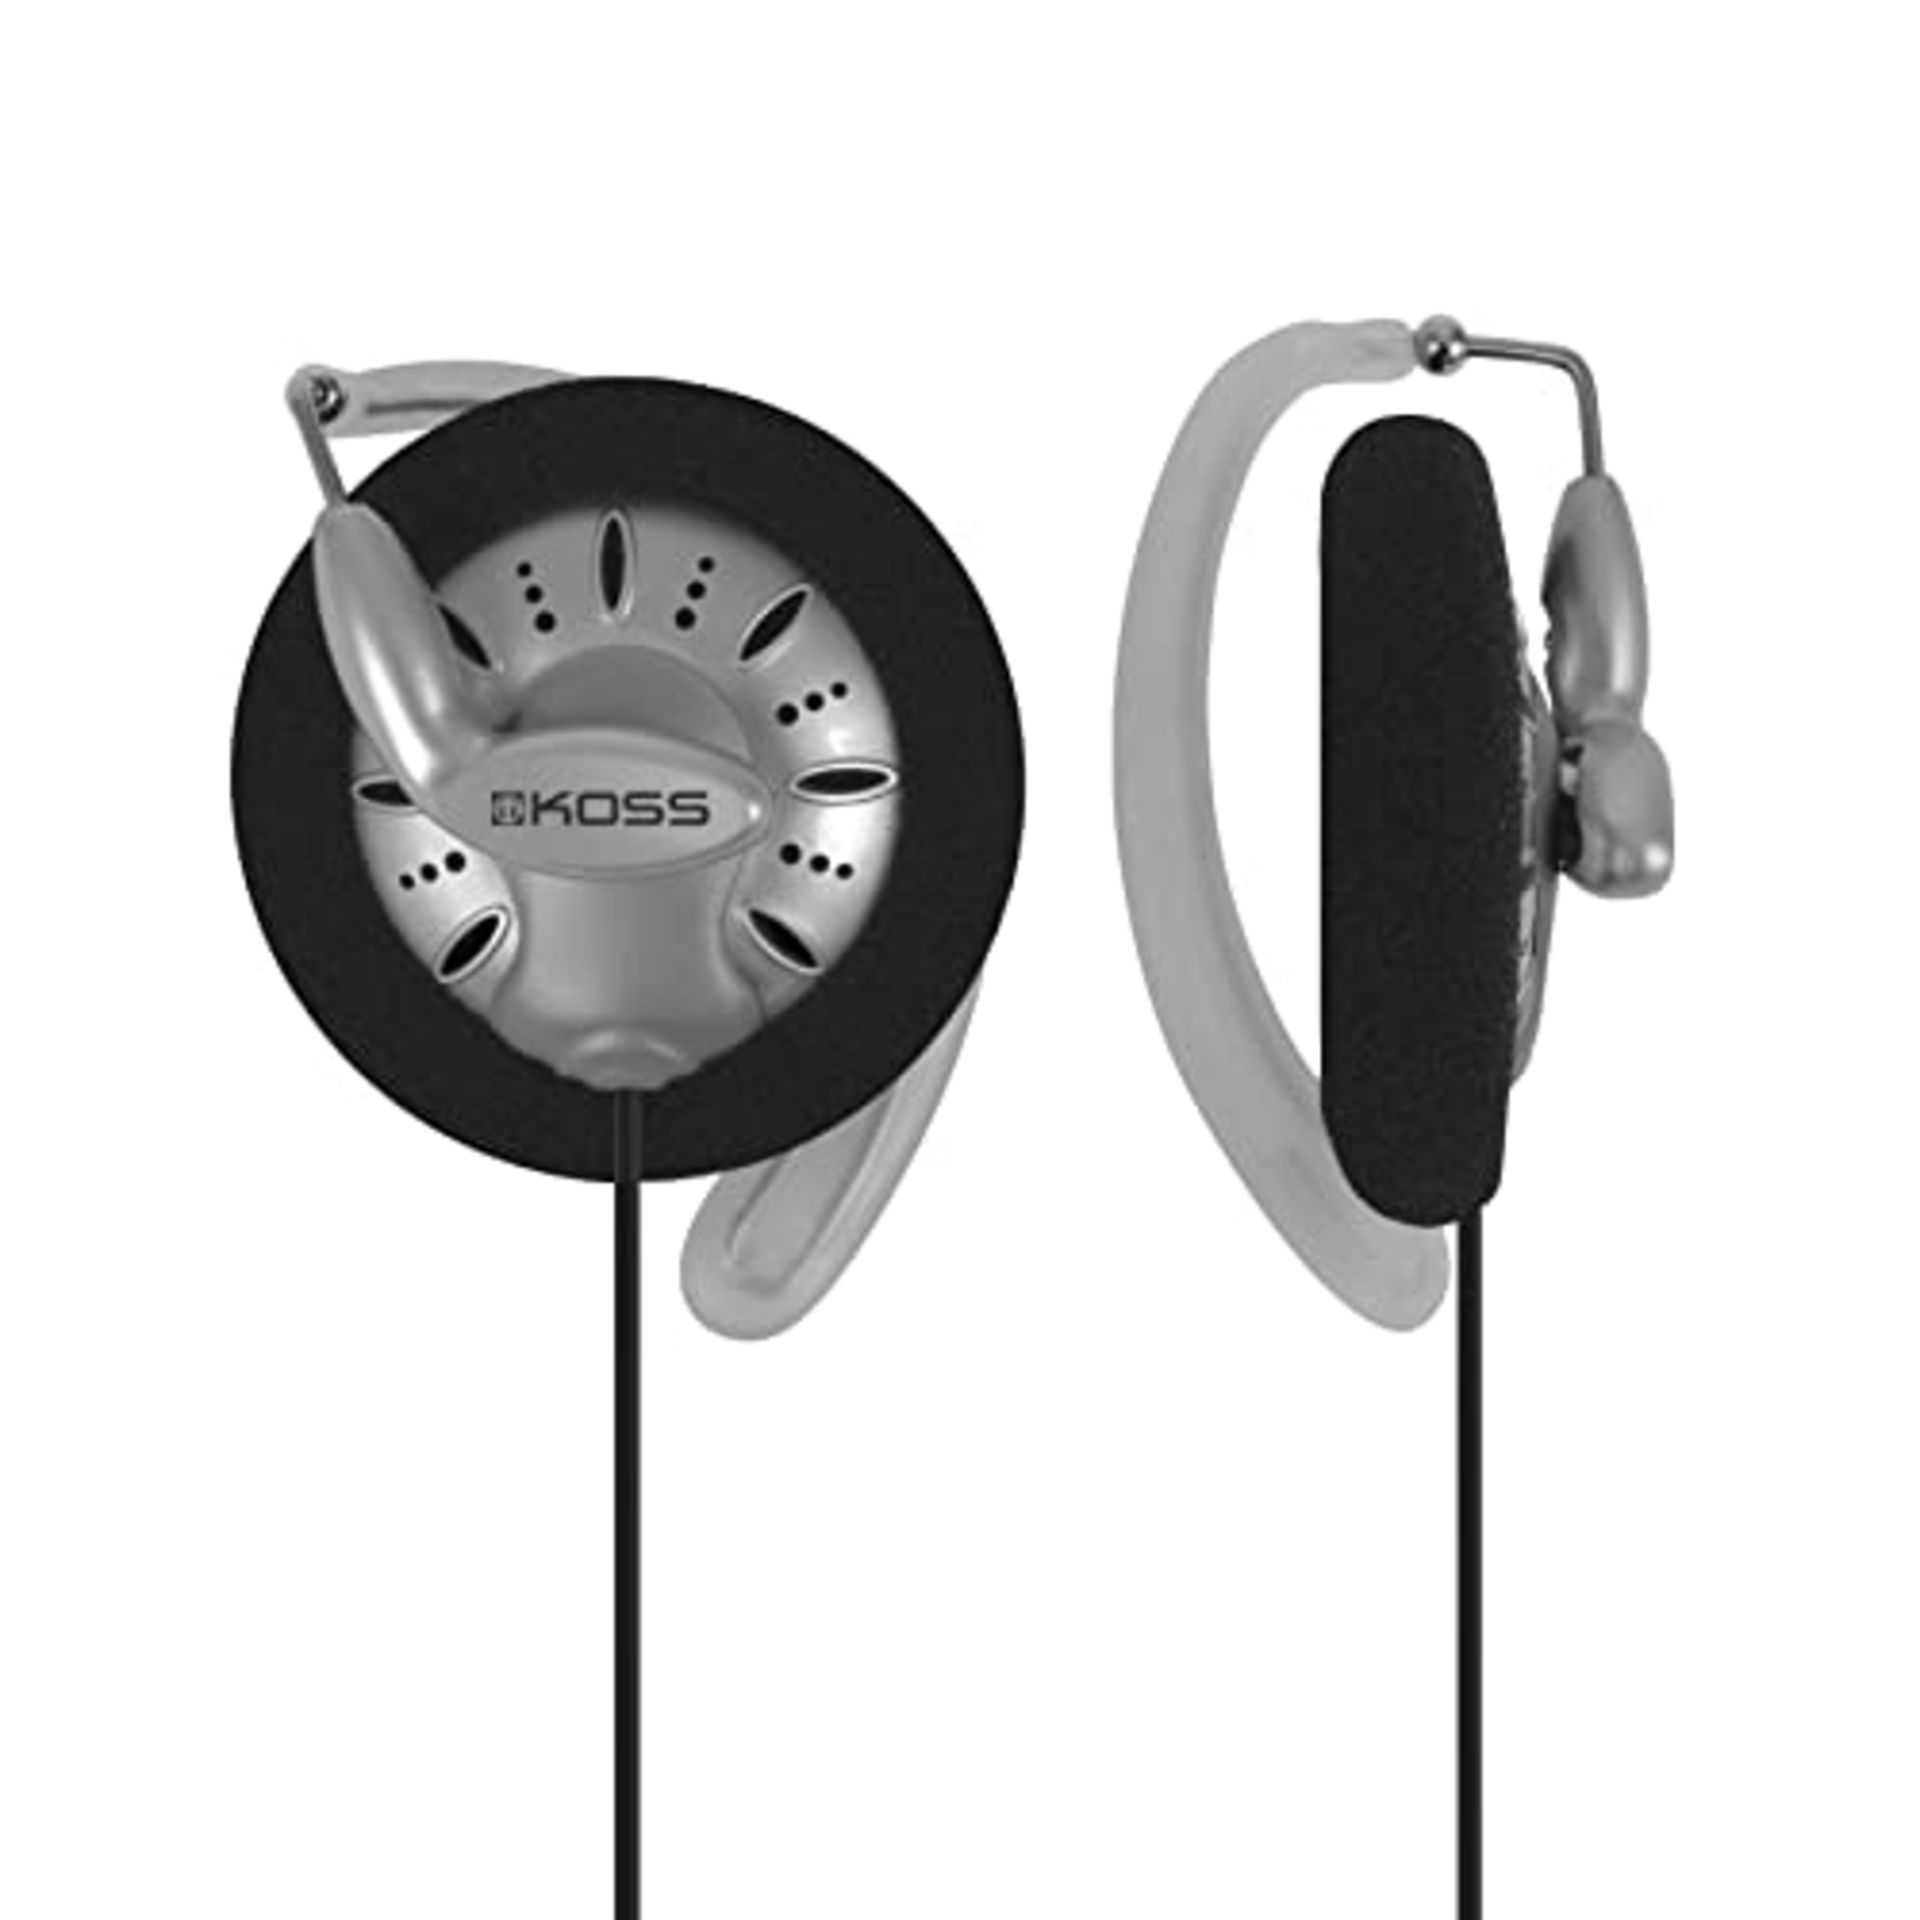 Koss KSC75 Clip-On Stereo Headphones for iPod, iPhone, MP3 and Smartphone - Black / Si